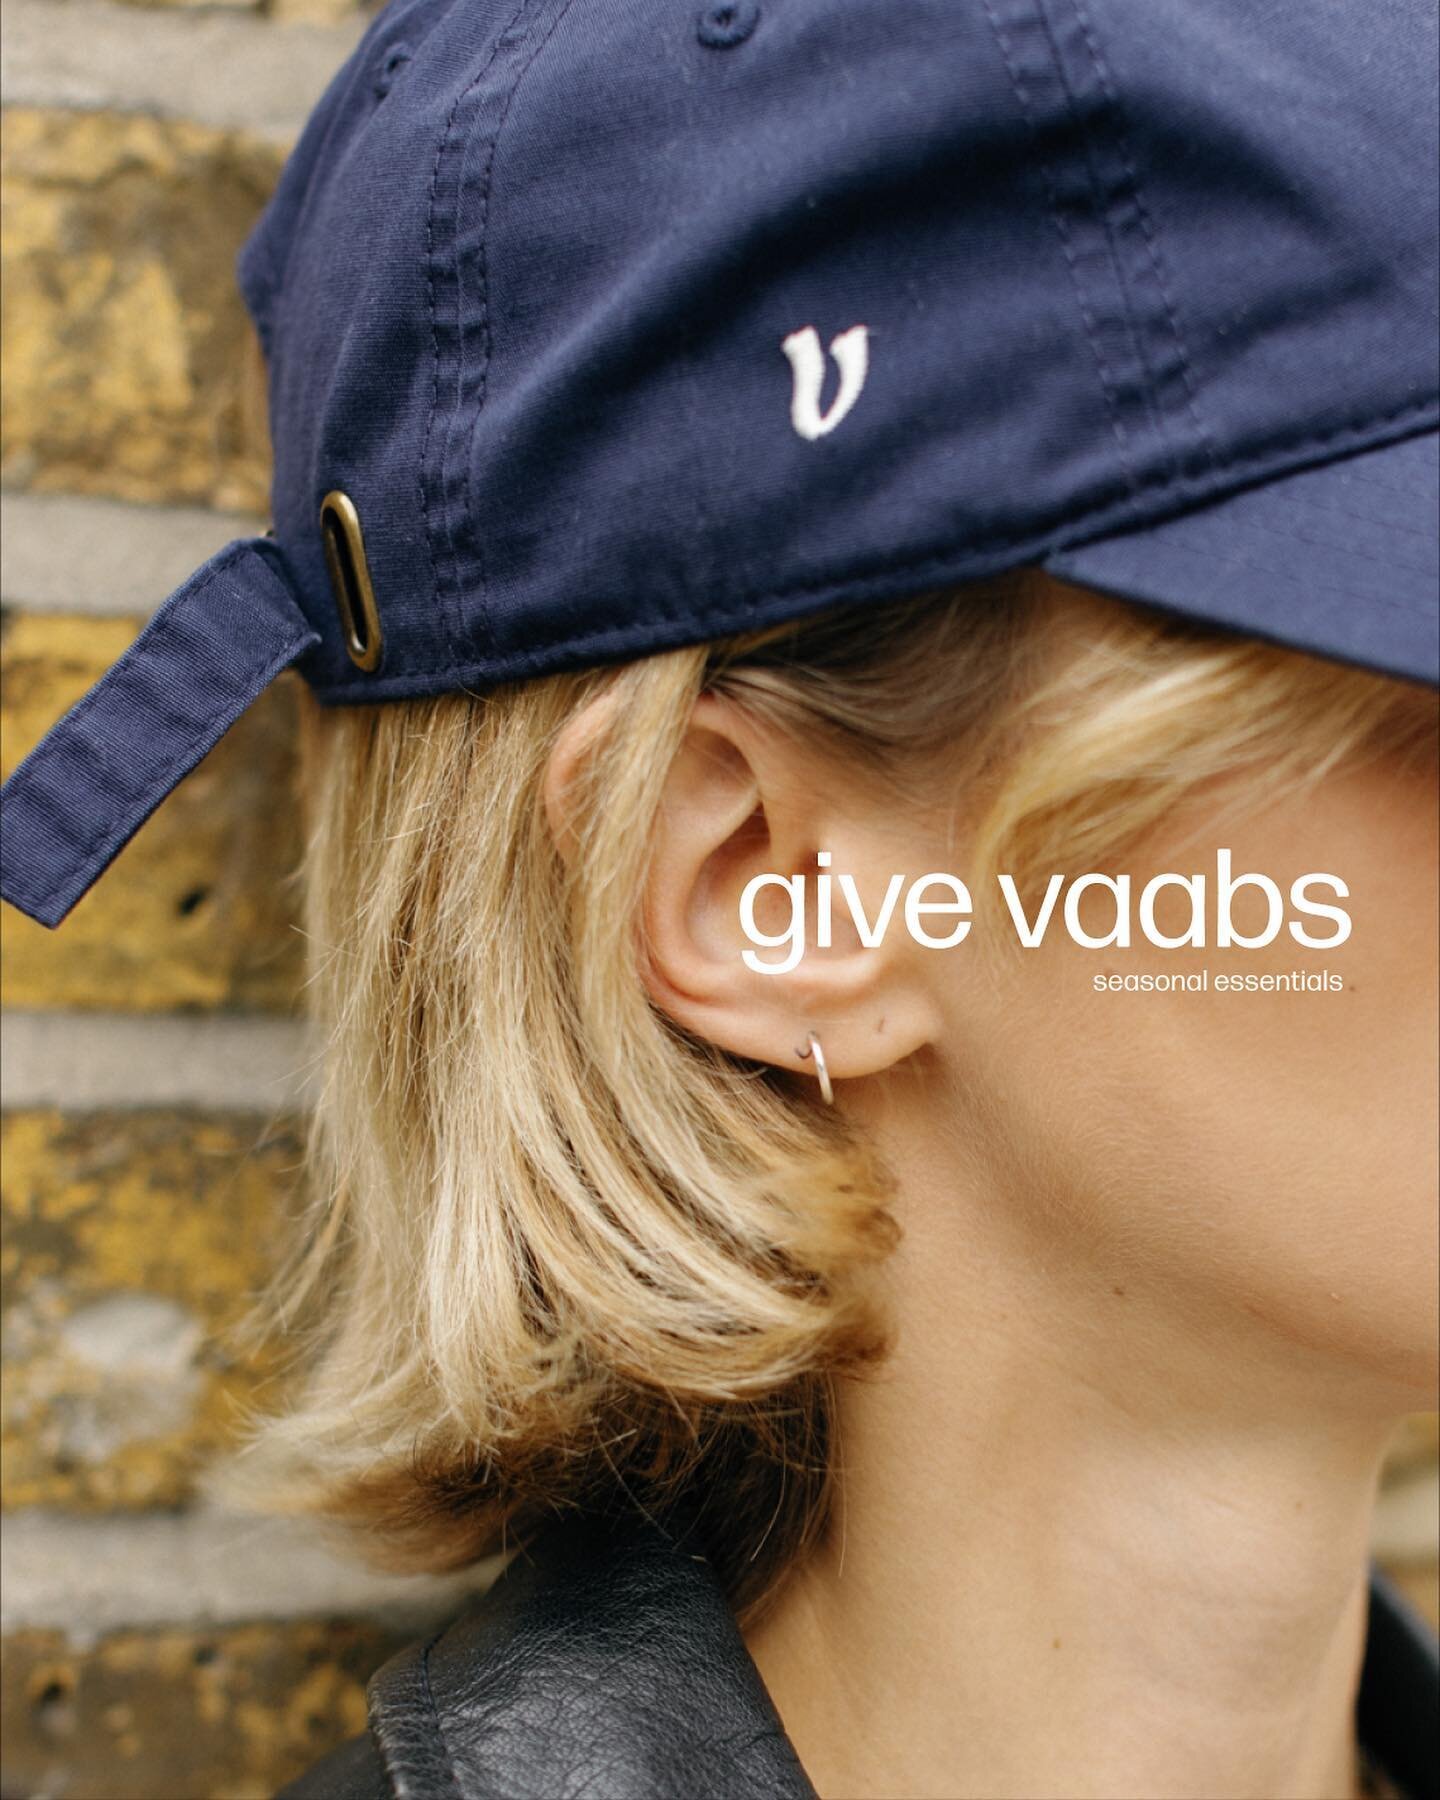 give vaabs, products that have a meaningful place and honest purpose. 

Enjoy complimentary shipping on UK orders over &pound;100 &amp; international orders over &pound;175 this festive season.